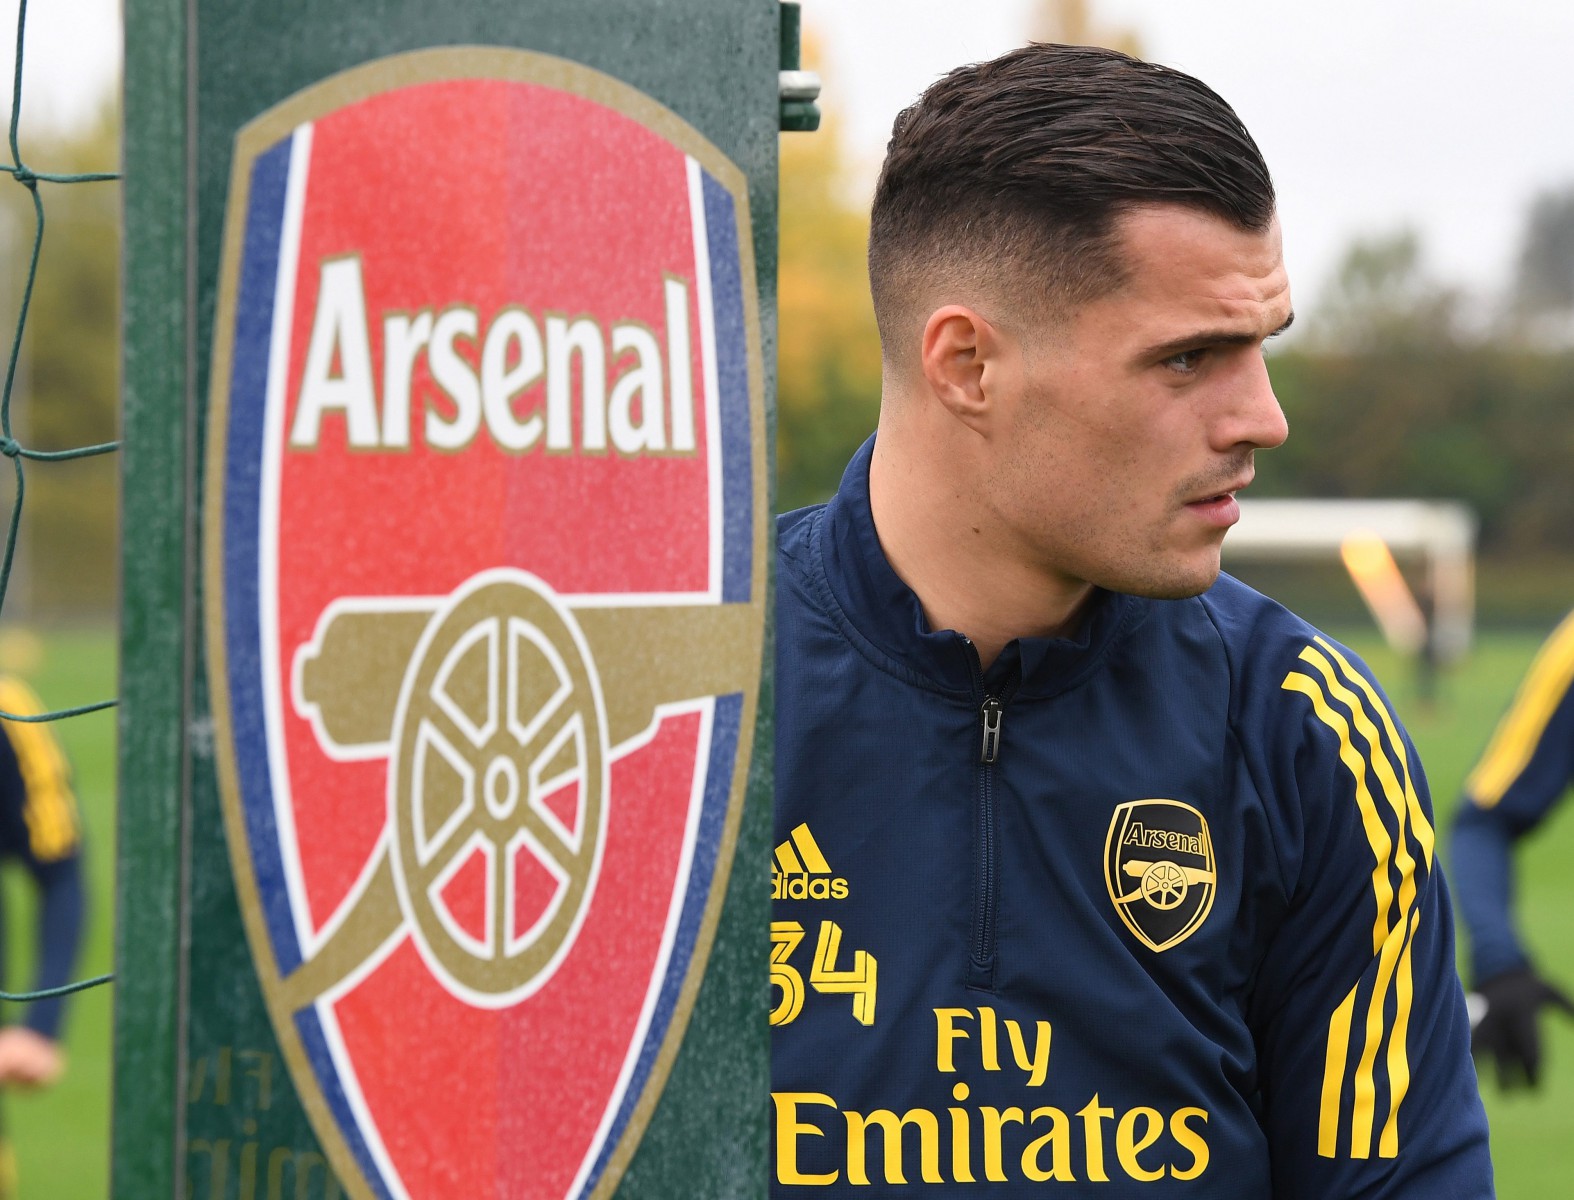 , Arsenal blocked Granit Xhaka from making statement sooner after he told fans to f*** off